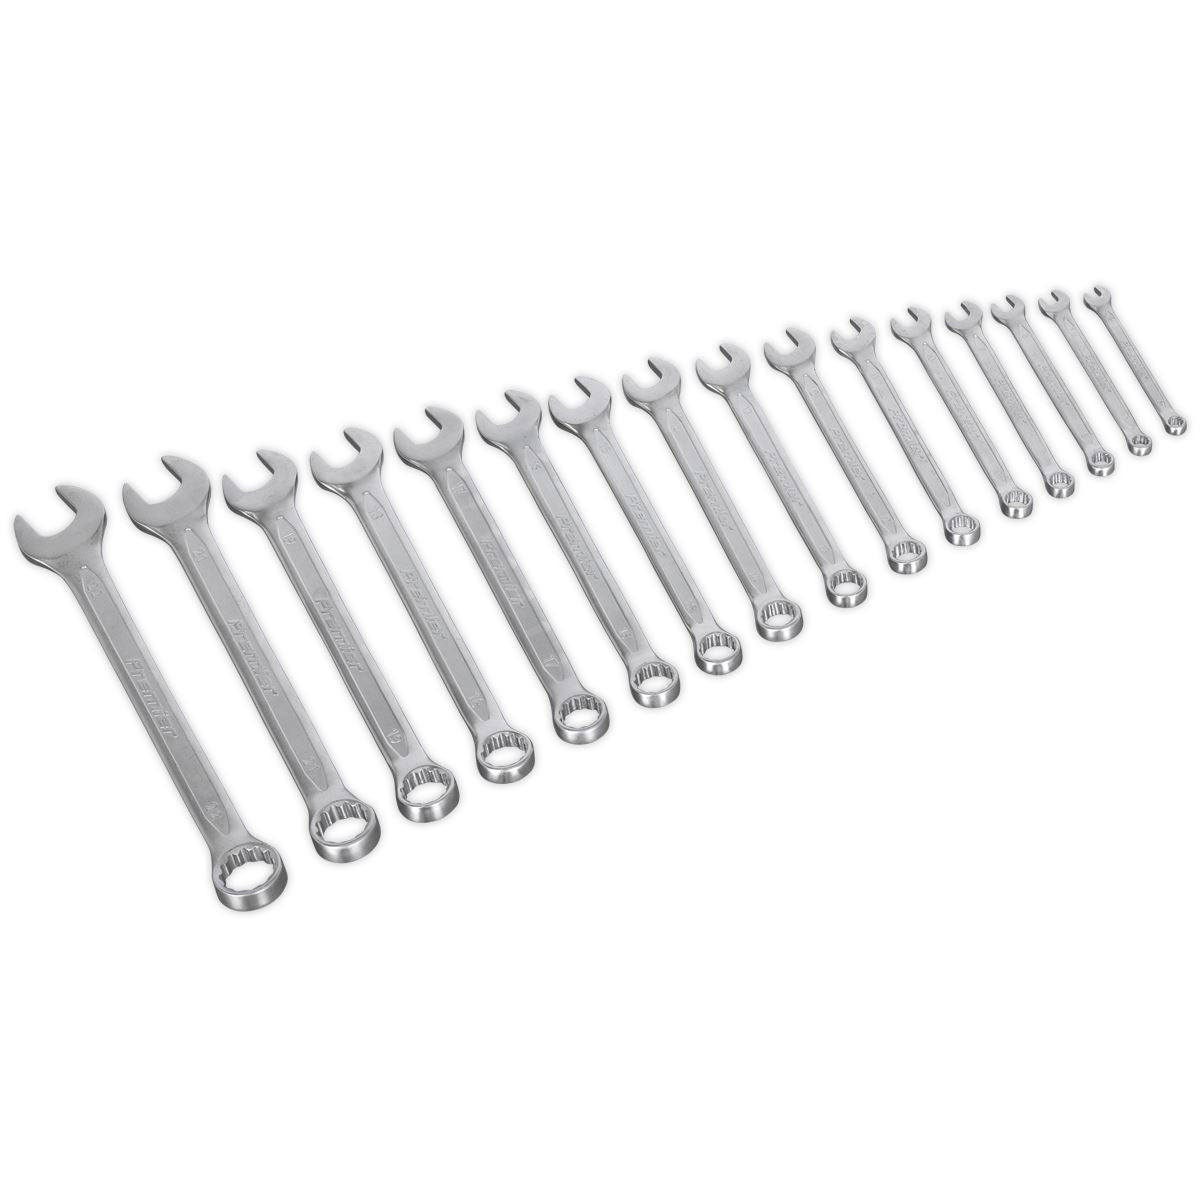 Sealey Premier 16 Piece Cold Stamped Combination Spanner Set Metric 6-22mm